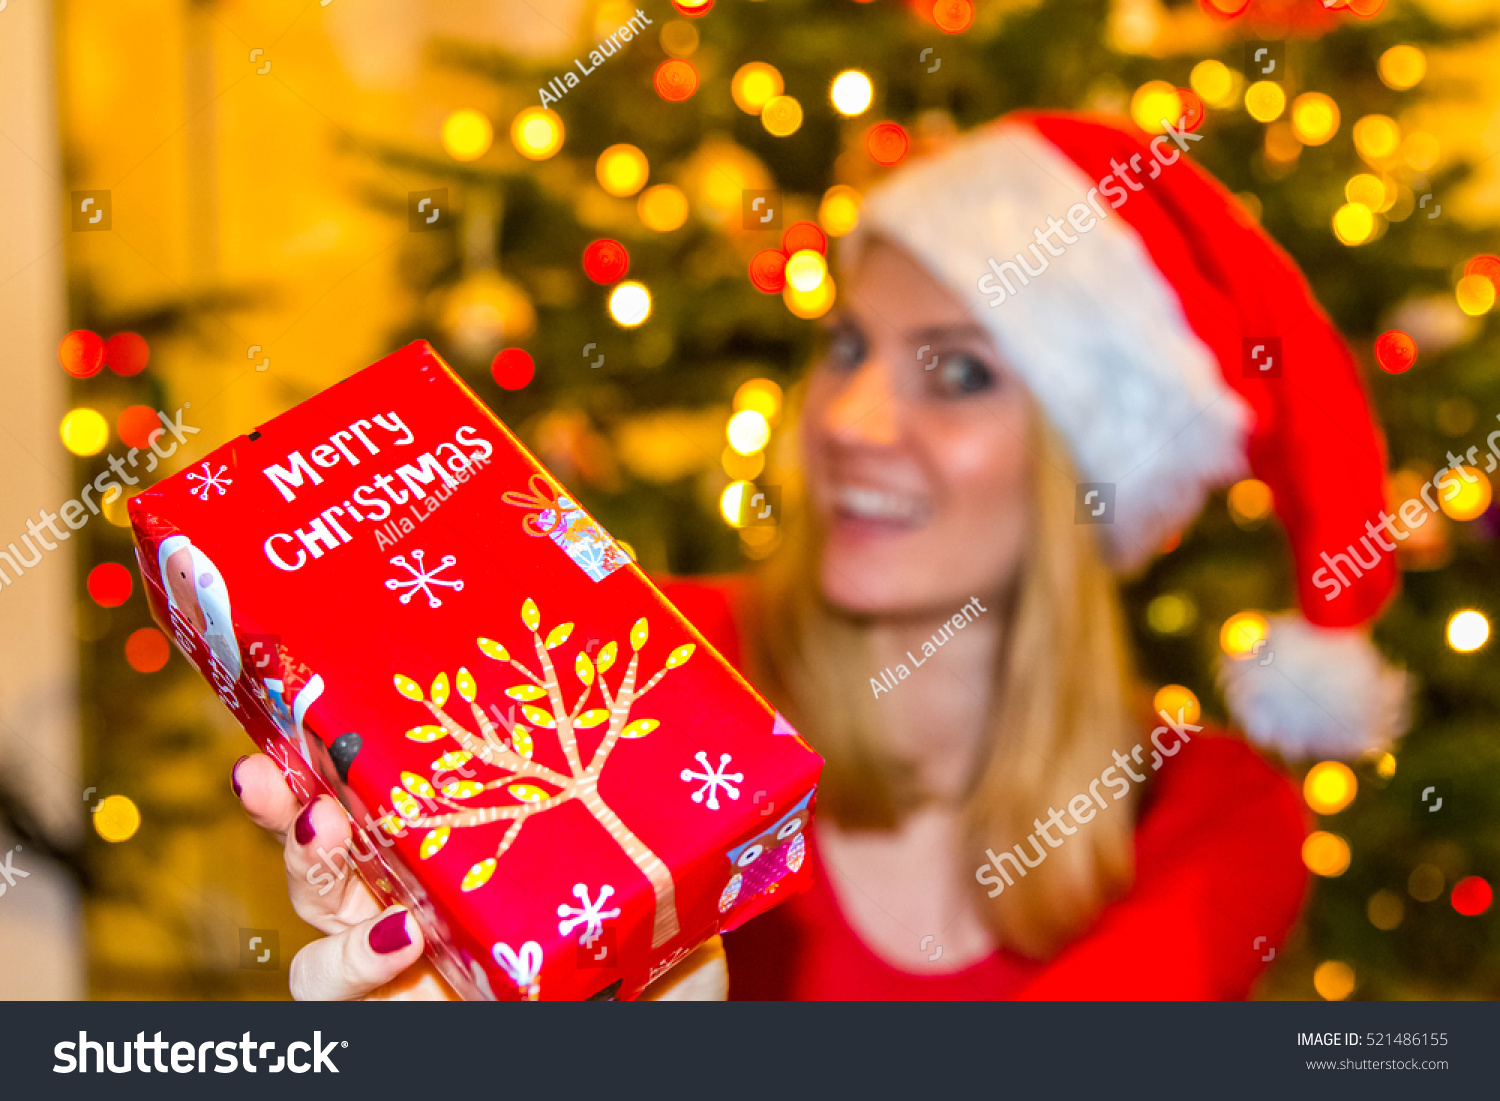 Christmas presents, woman holds presents #521486155